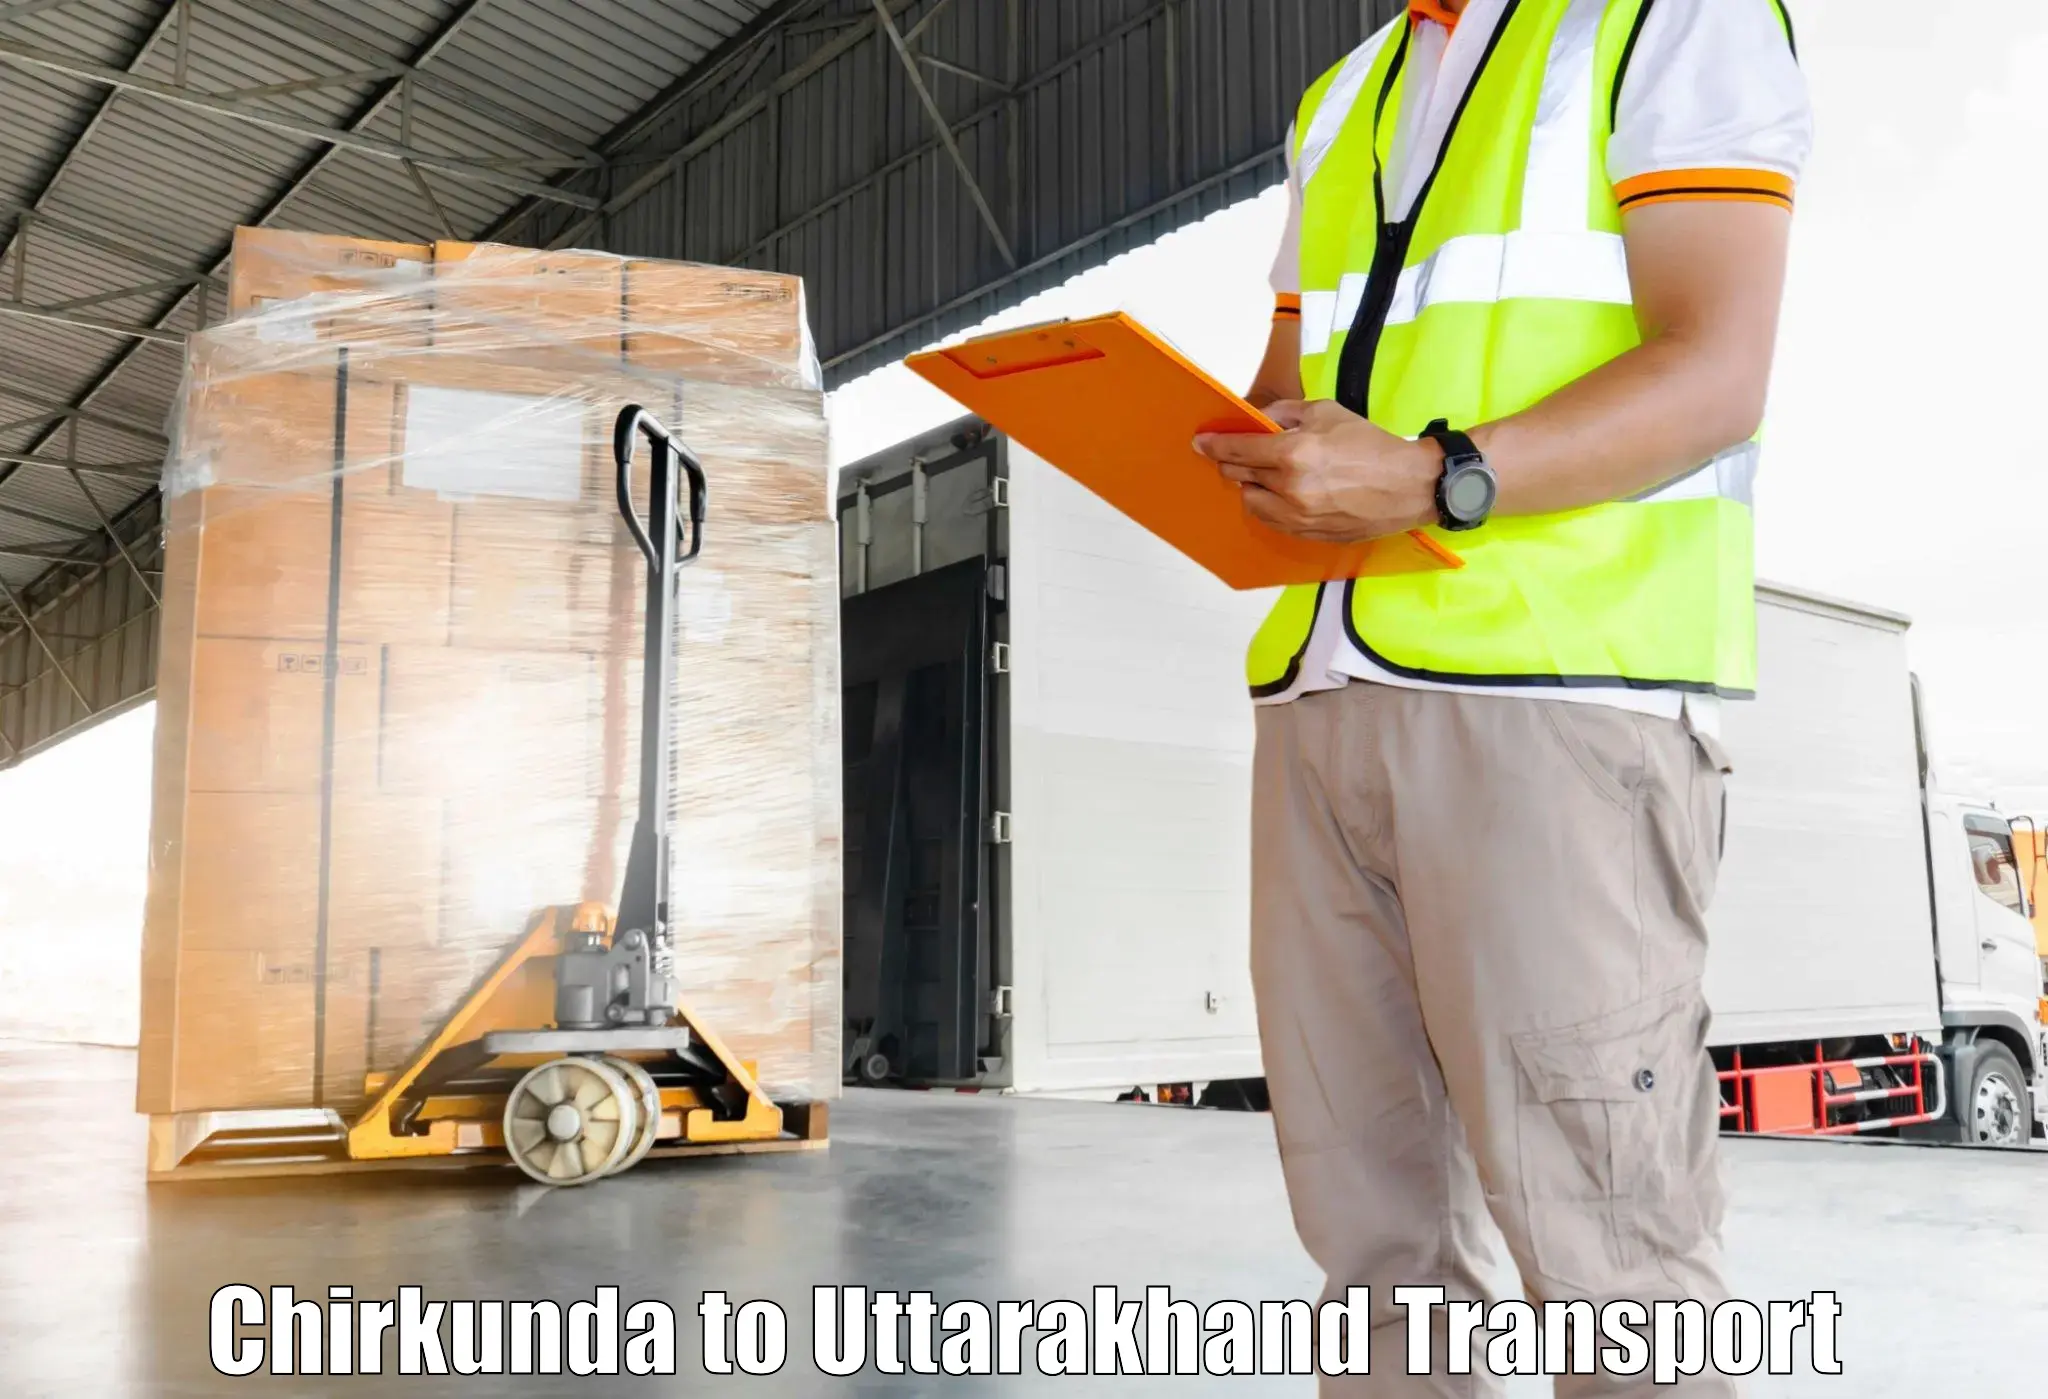 Container transport service in Chirkunda to Doiwala